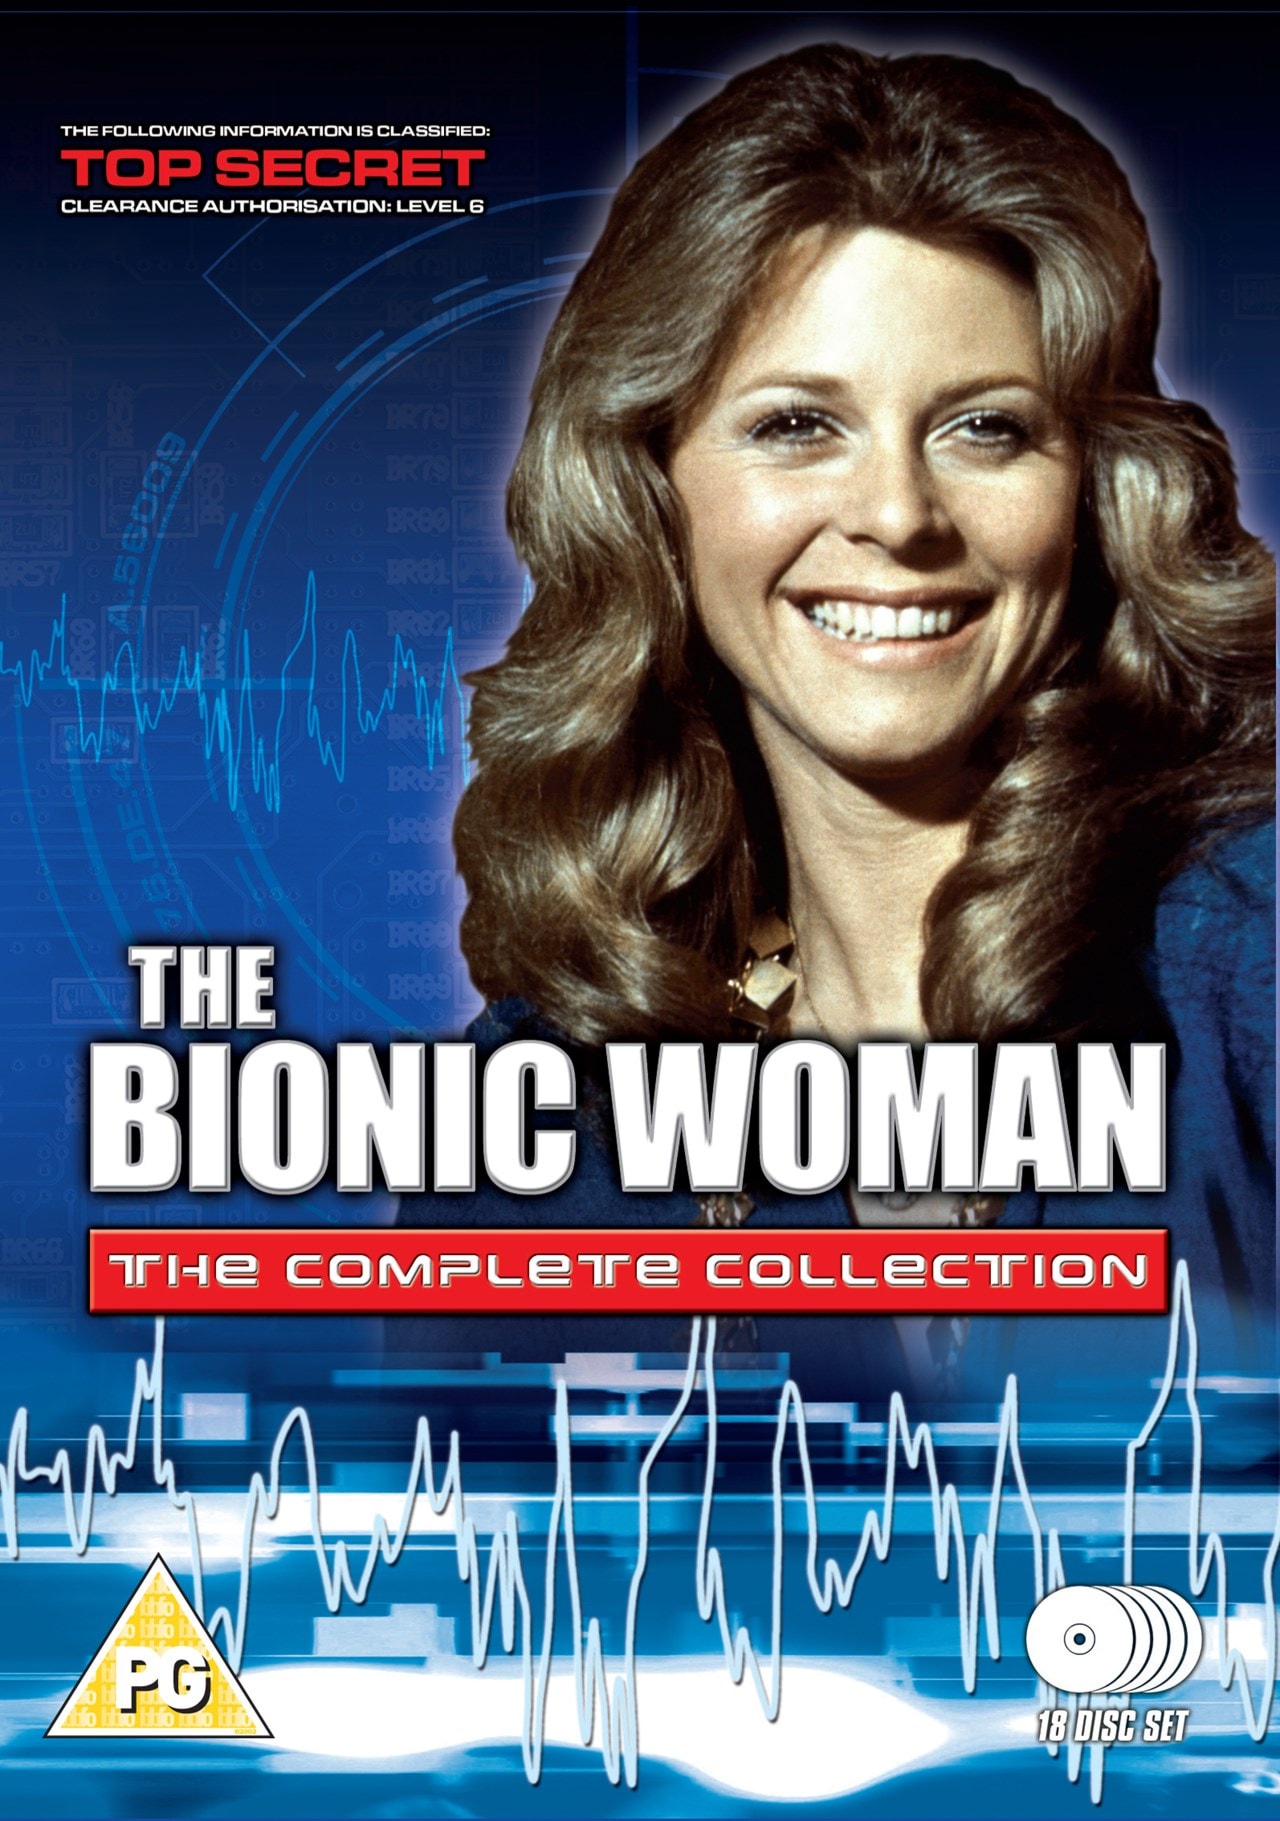 The Bionic Woman The Complete Collection Dvd Free Shipping Over £20 Hmv Store 